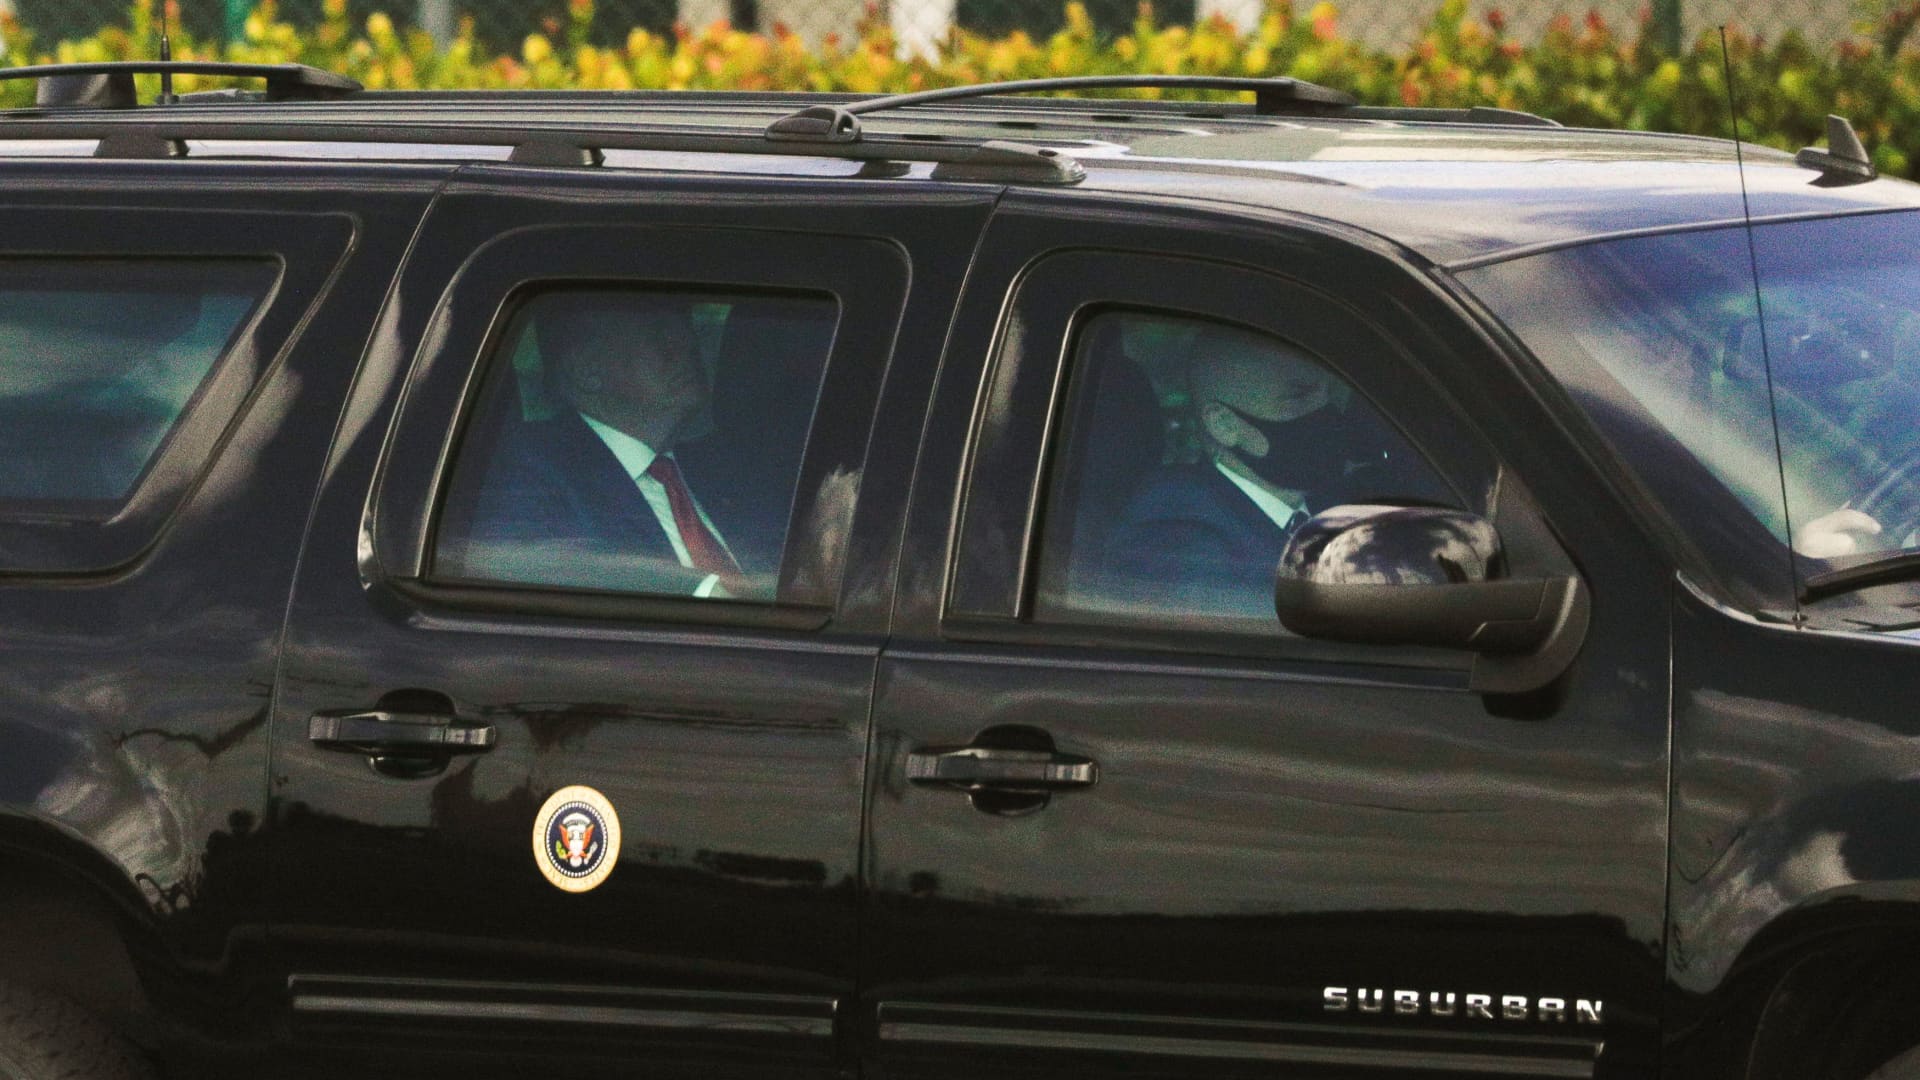 U.S. President Donald Trump is pictured inside of his armoured vehicle while departing his Mar-a-Lago resort in West Palm Beach, Florida, U.S., December 31, 2020.